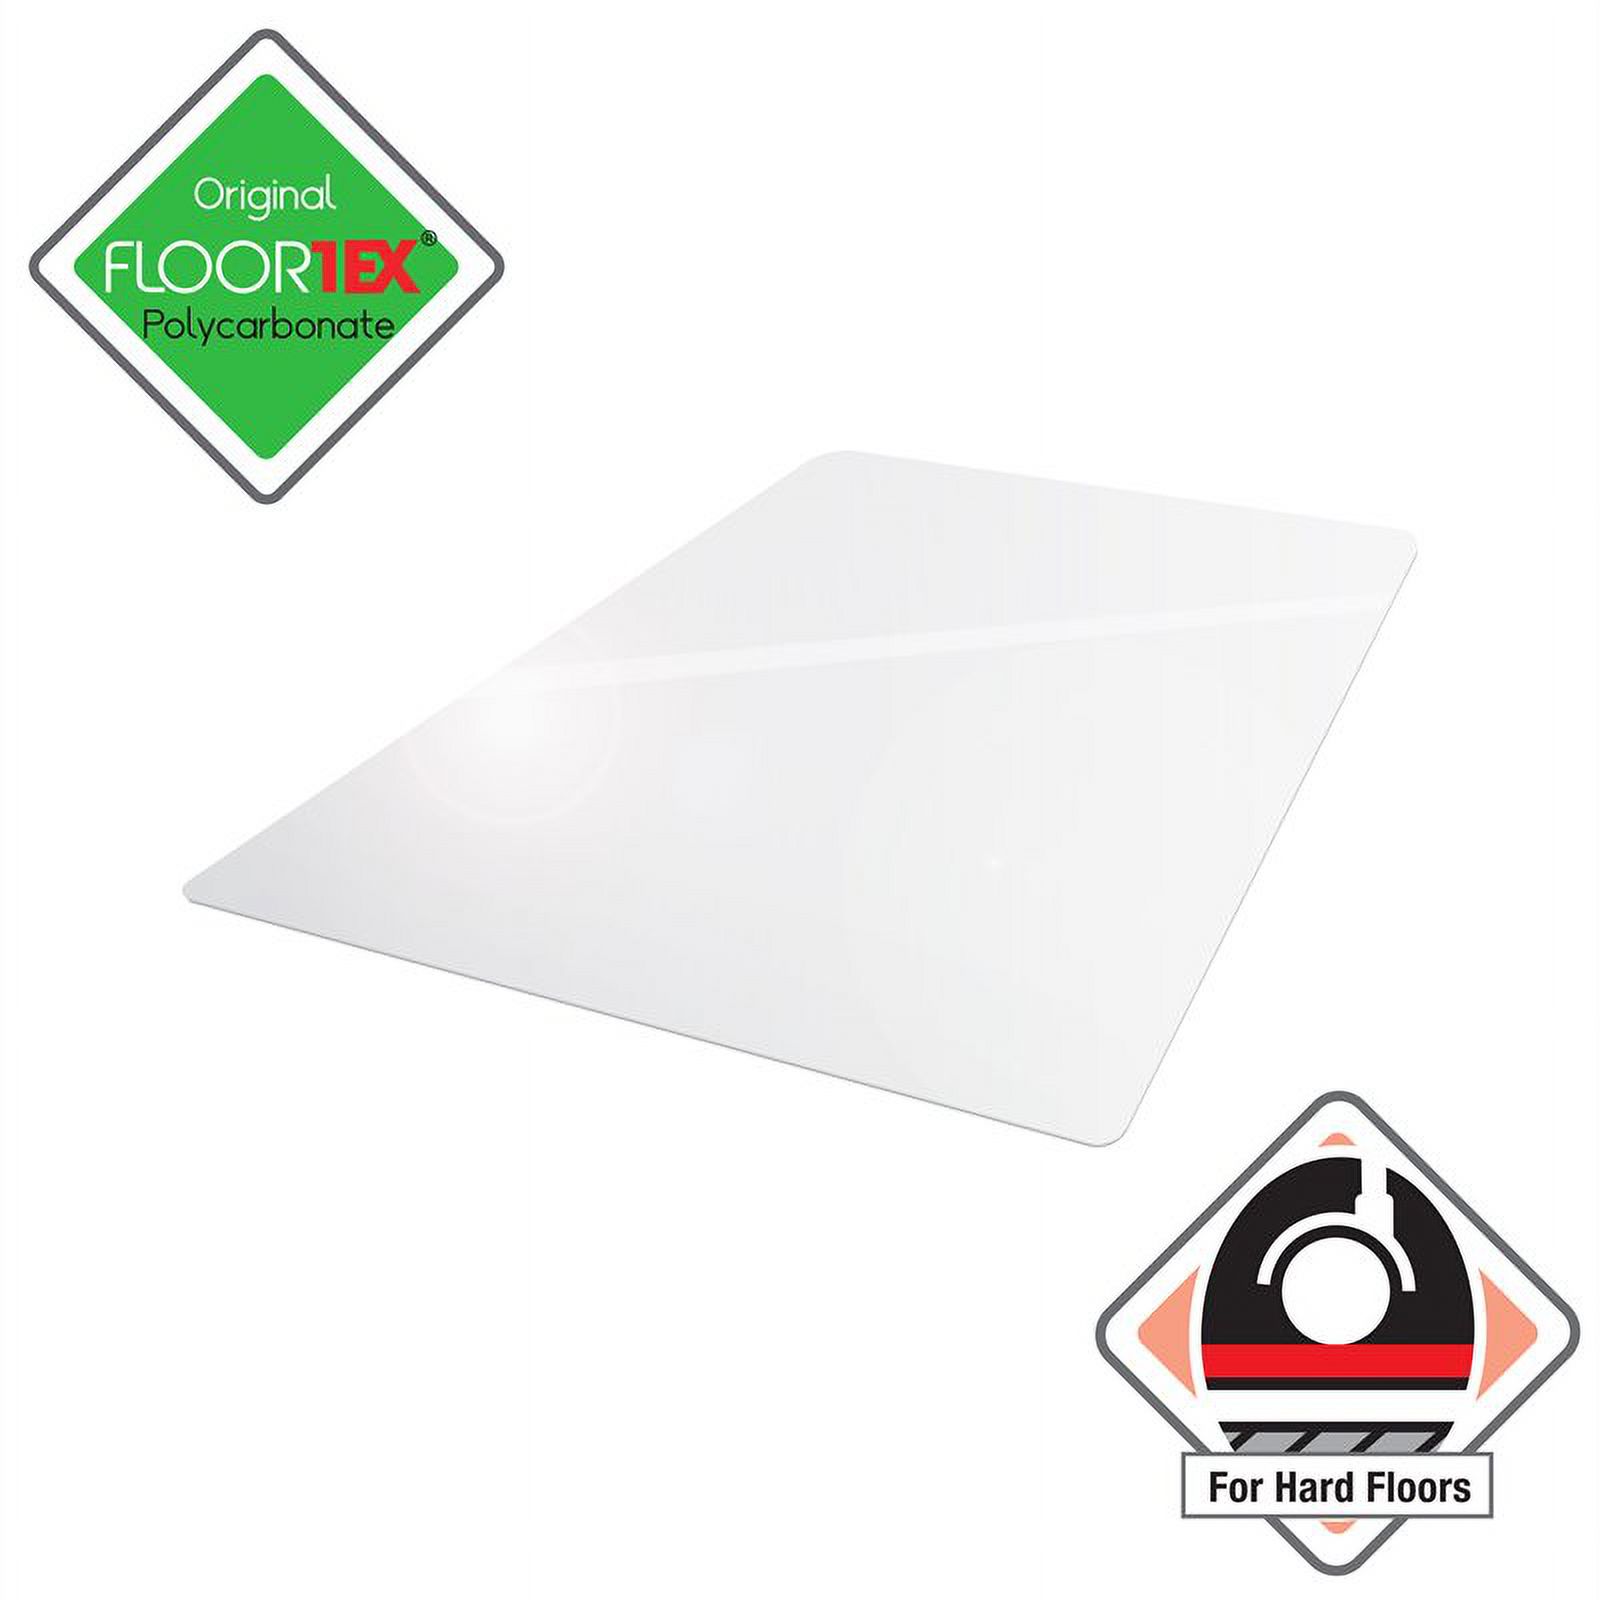 Ultimat® XXL Polycarbonate Square Chair Mat for Hard Floors - 60" x 60" - image 2 of 9